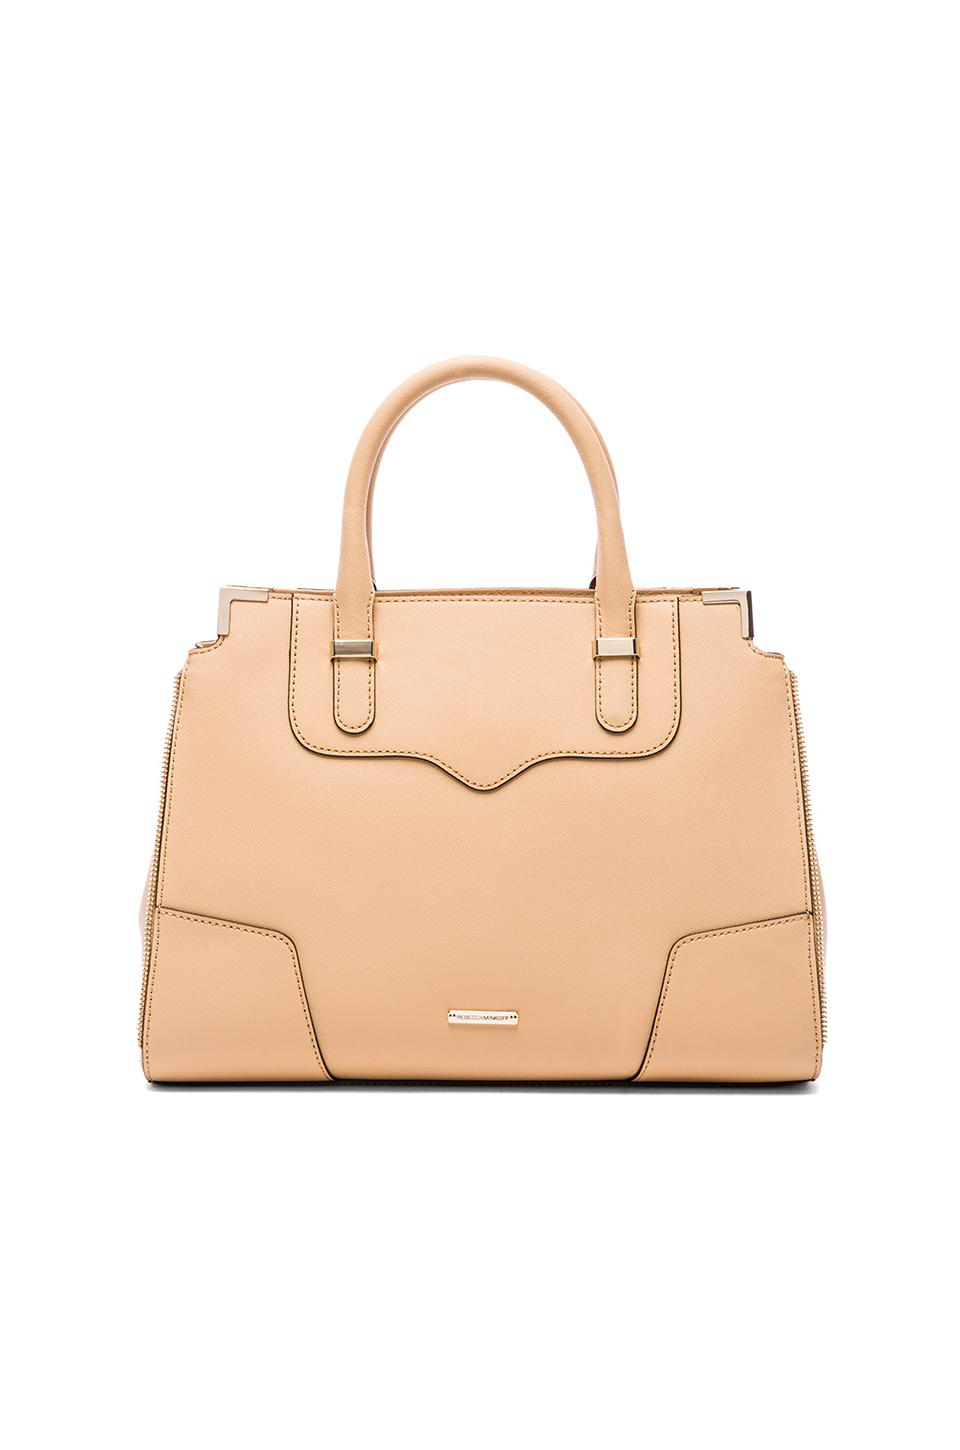 Lyst - Rebecca Minkoff Satchel Amorous in Natural